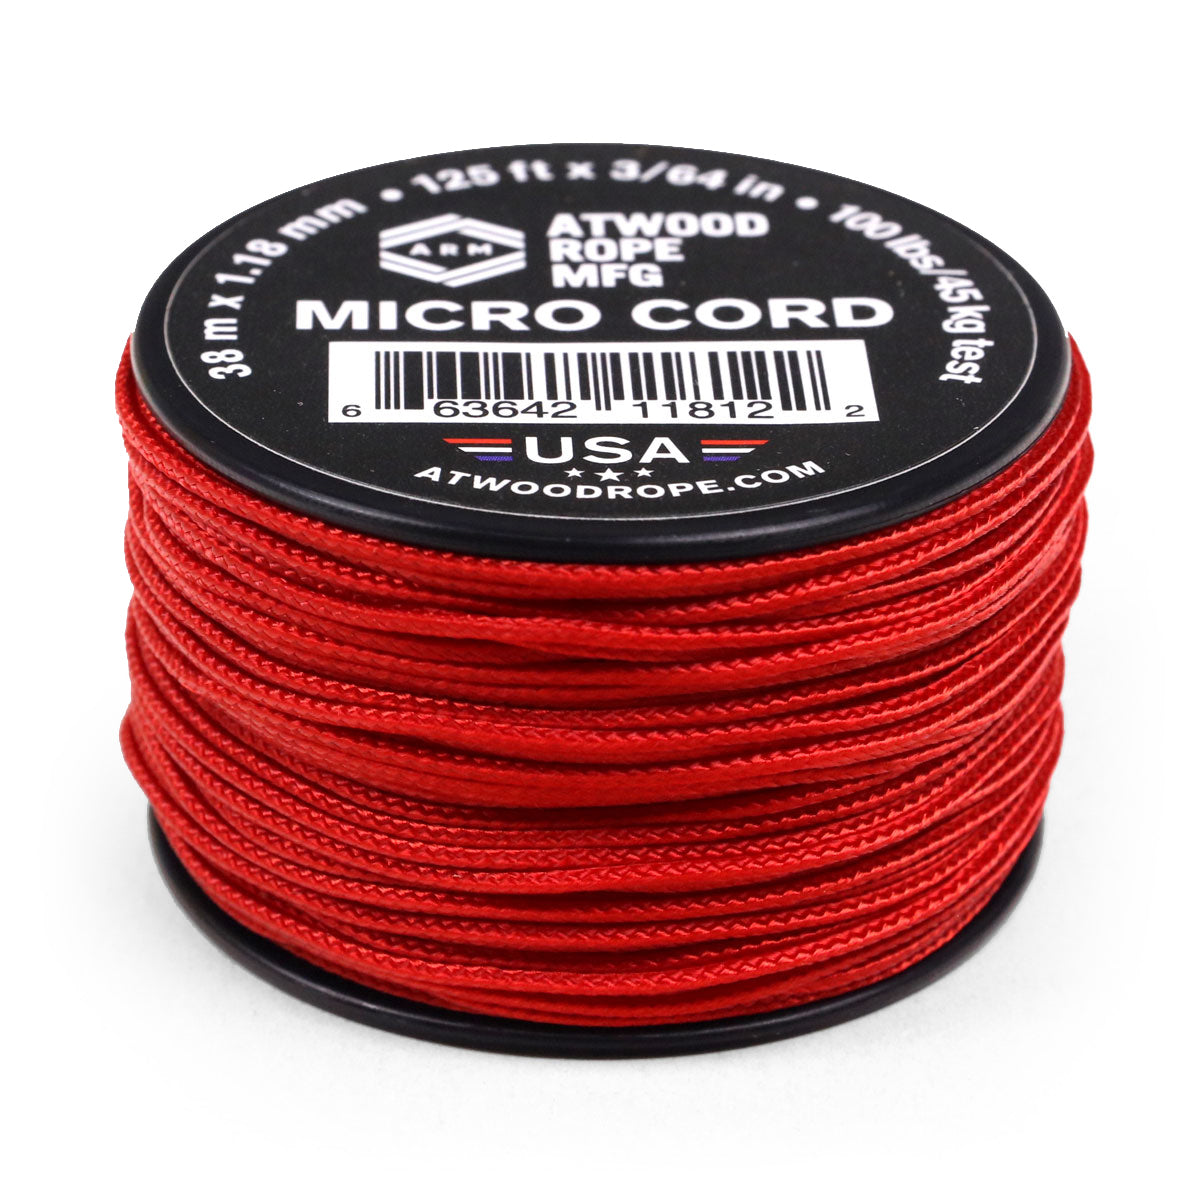 1.18mm Micro Cord - Red – Atwood Rope MFG